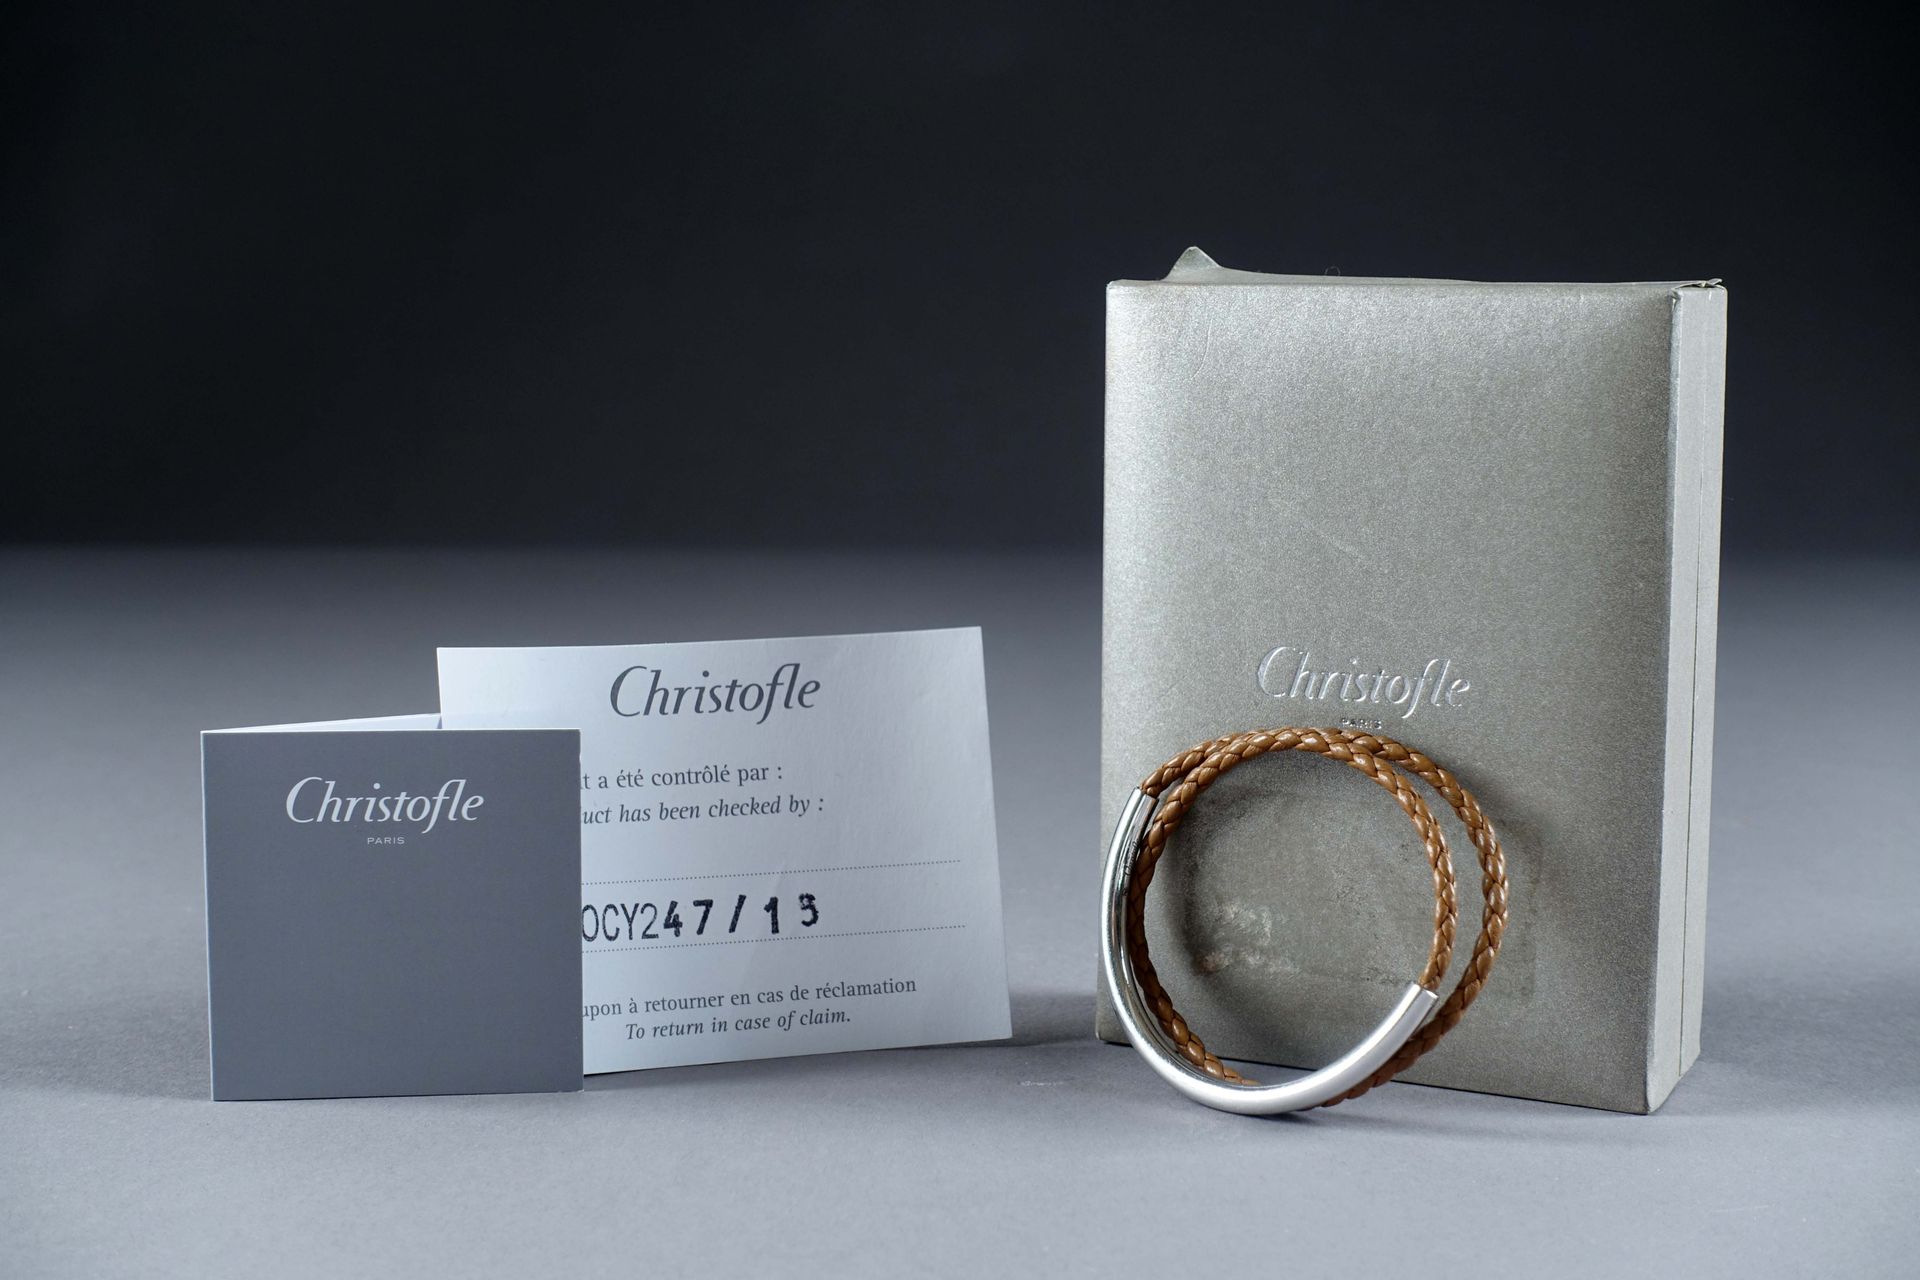 Christofle - Paris. Duo Complice bracelet in caramel leather and silver 950/000.&hellip;